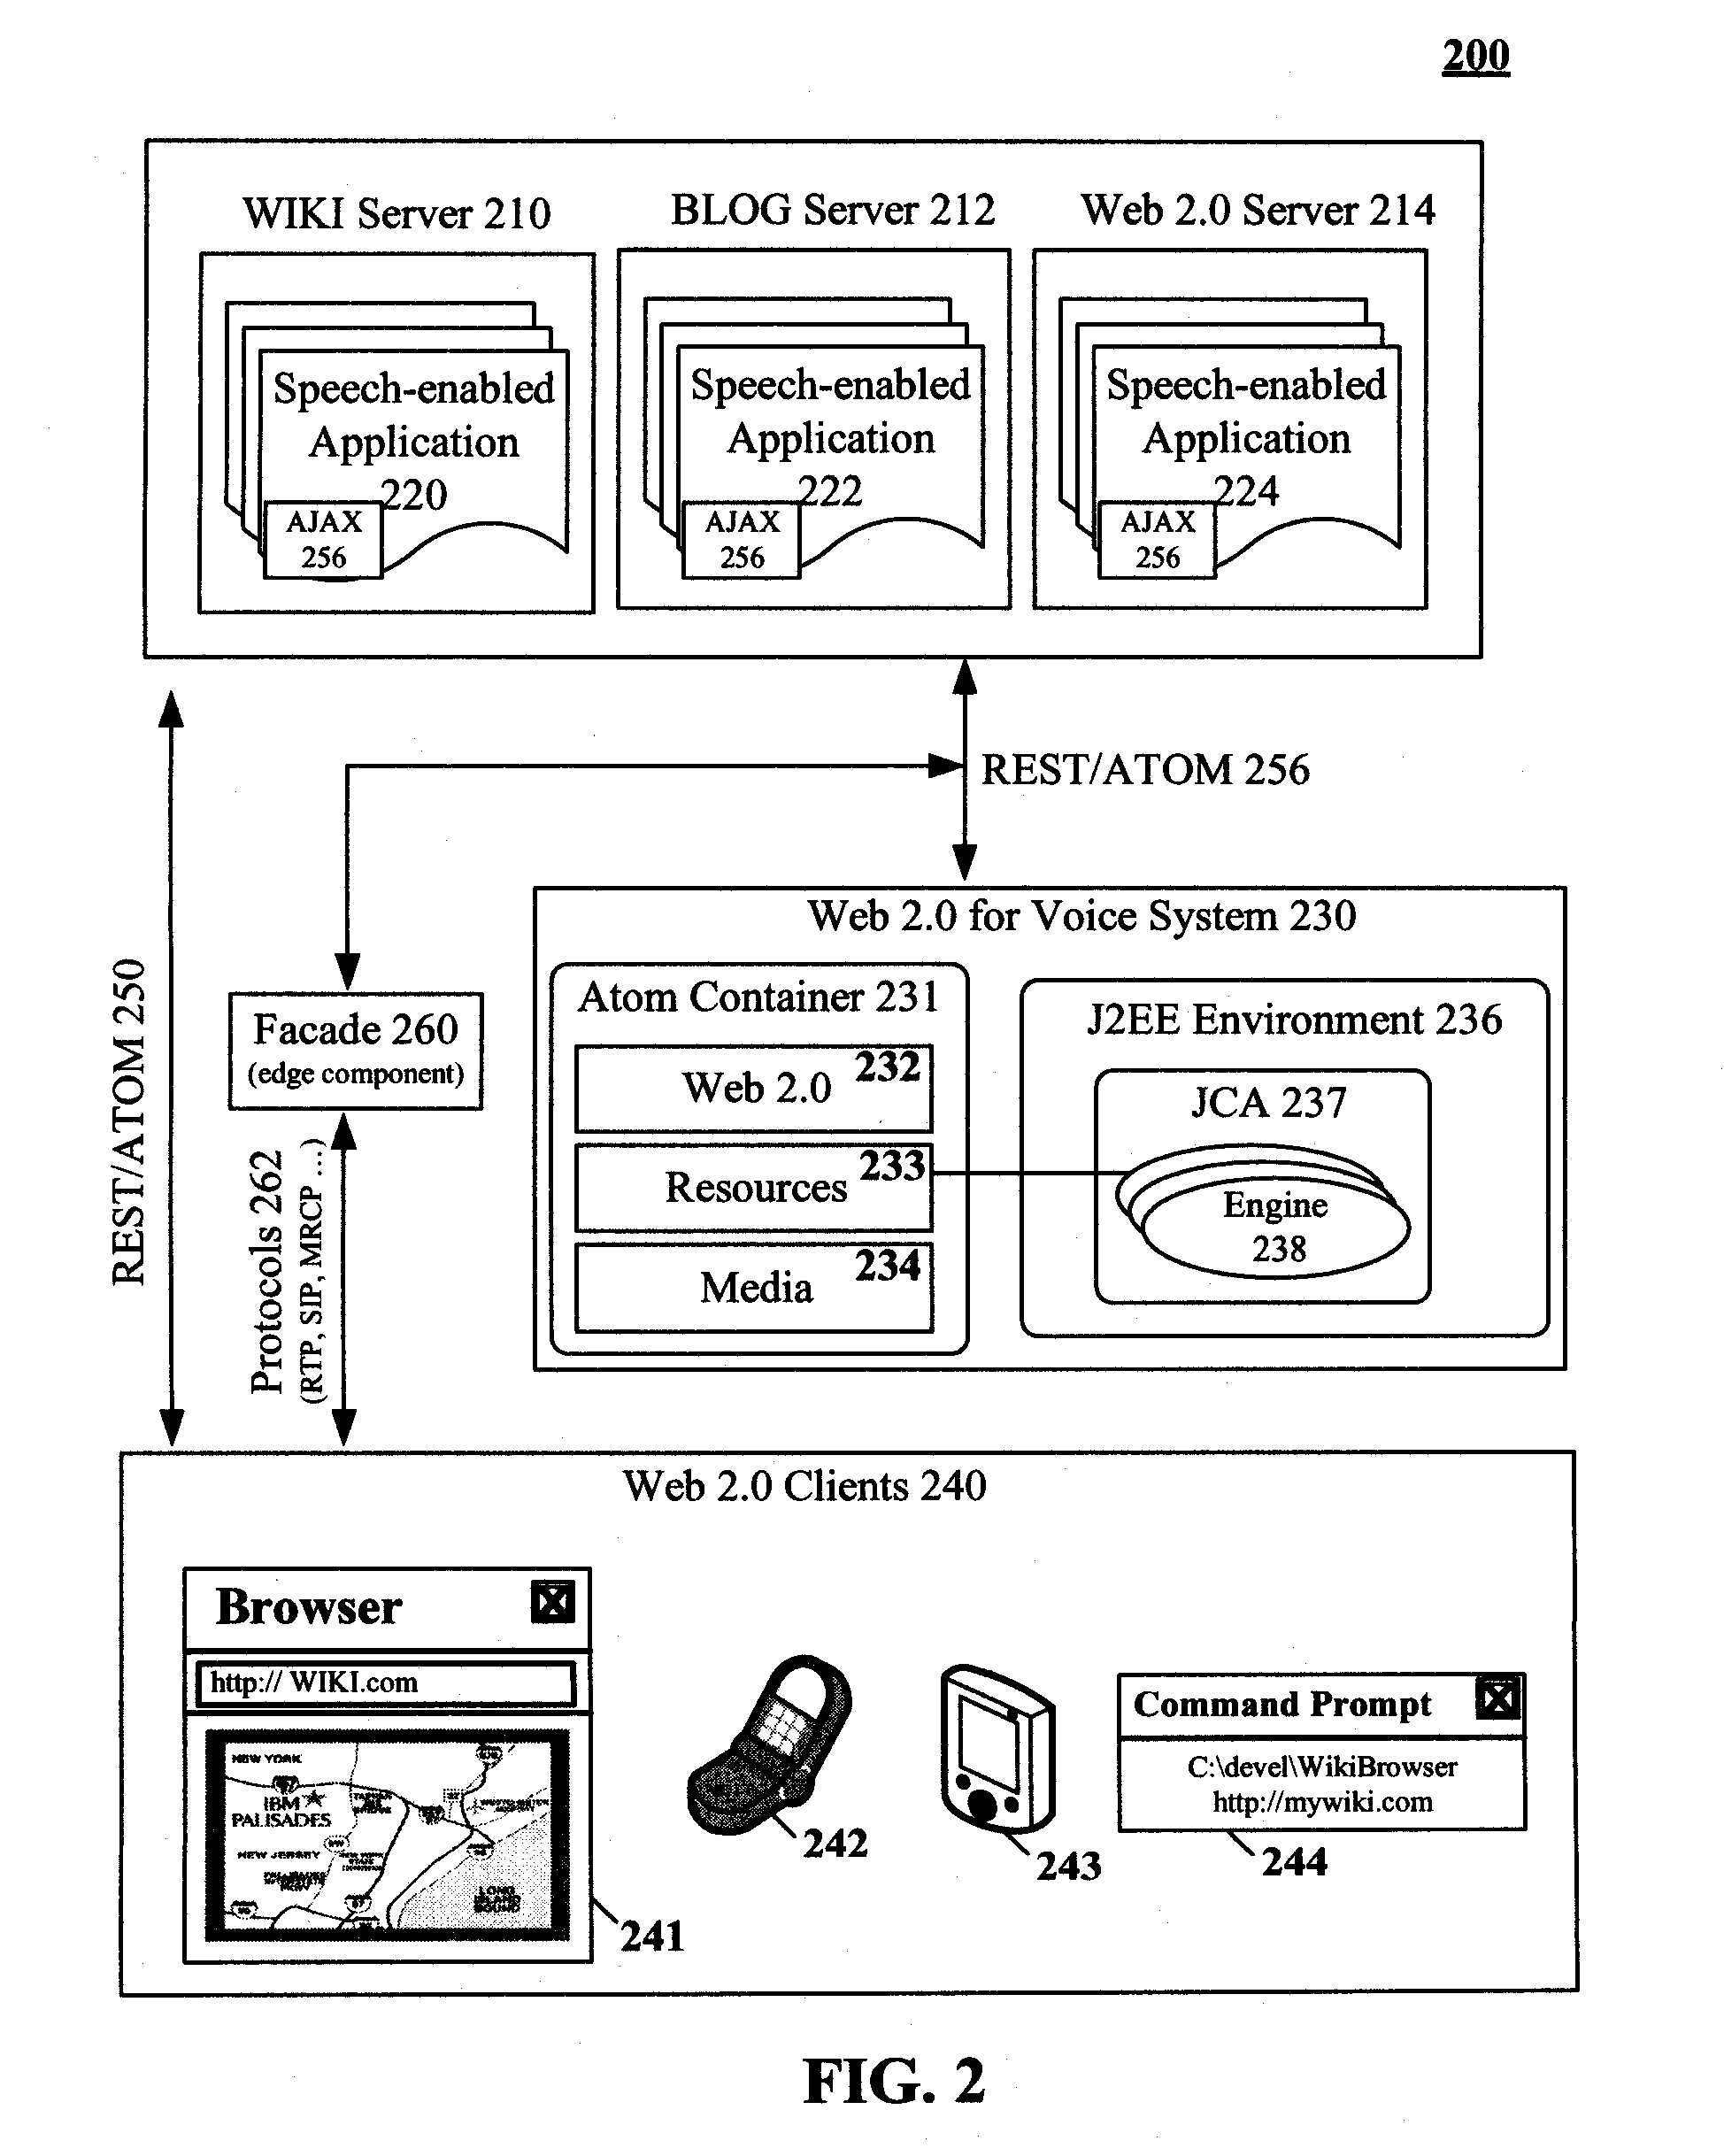 Speech processing method based upon a representational state transfer (REST) architecture that uses web 2.0 concepts for speech resource interfaces